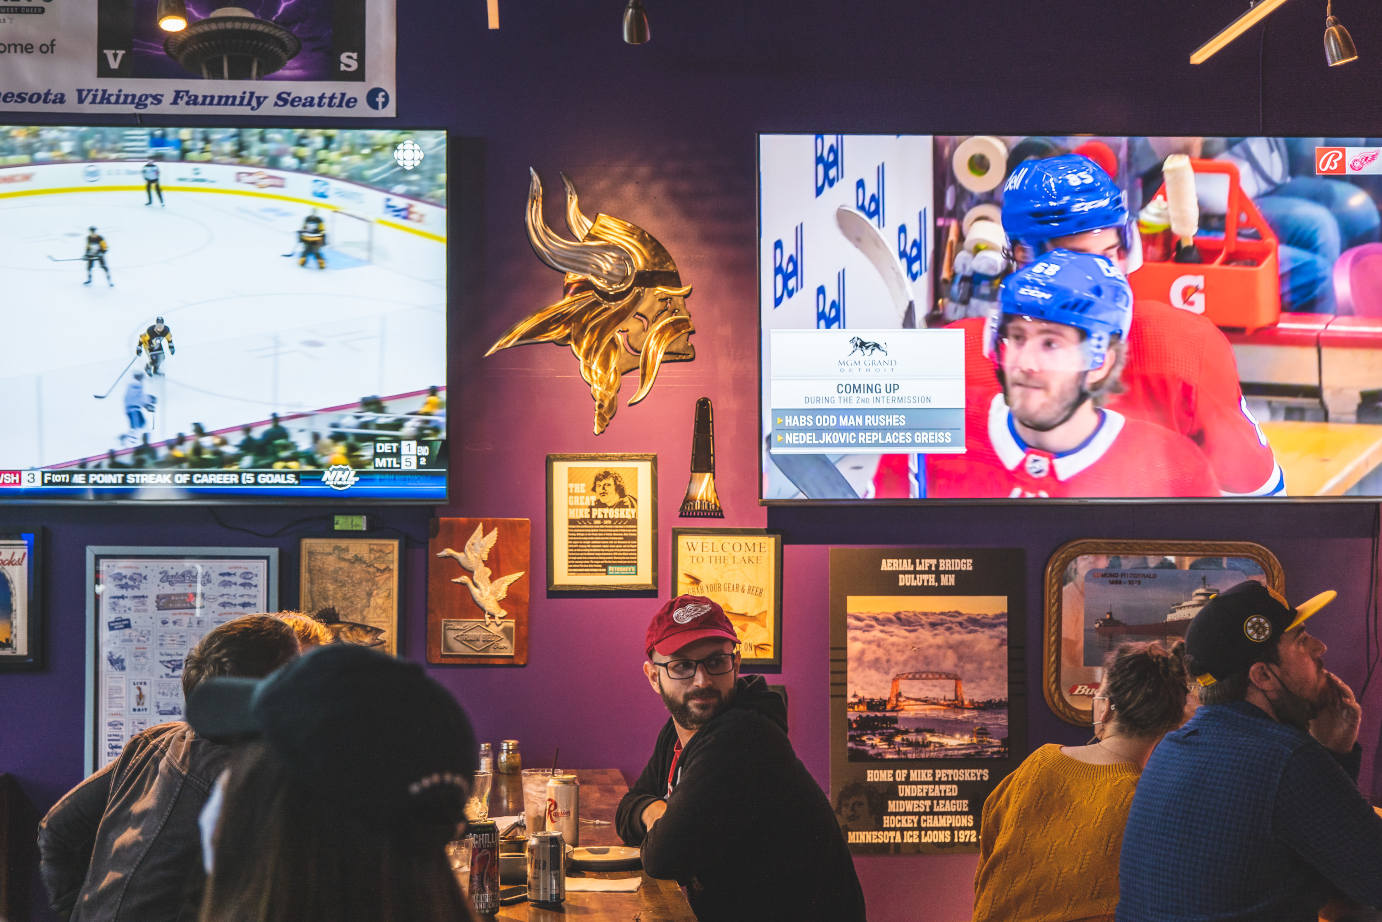 Interior, people watching hockey match broadcasts on large TV screens